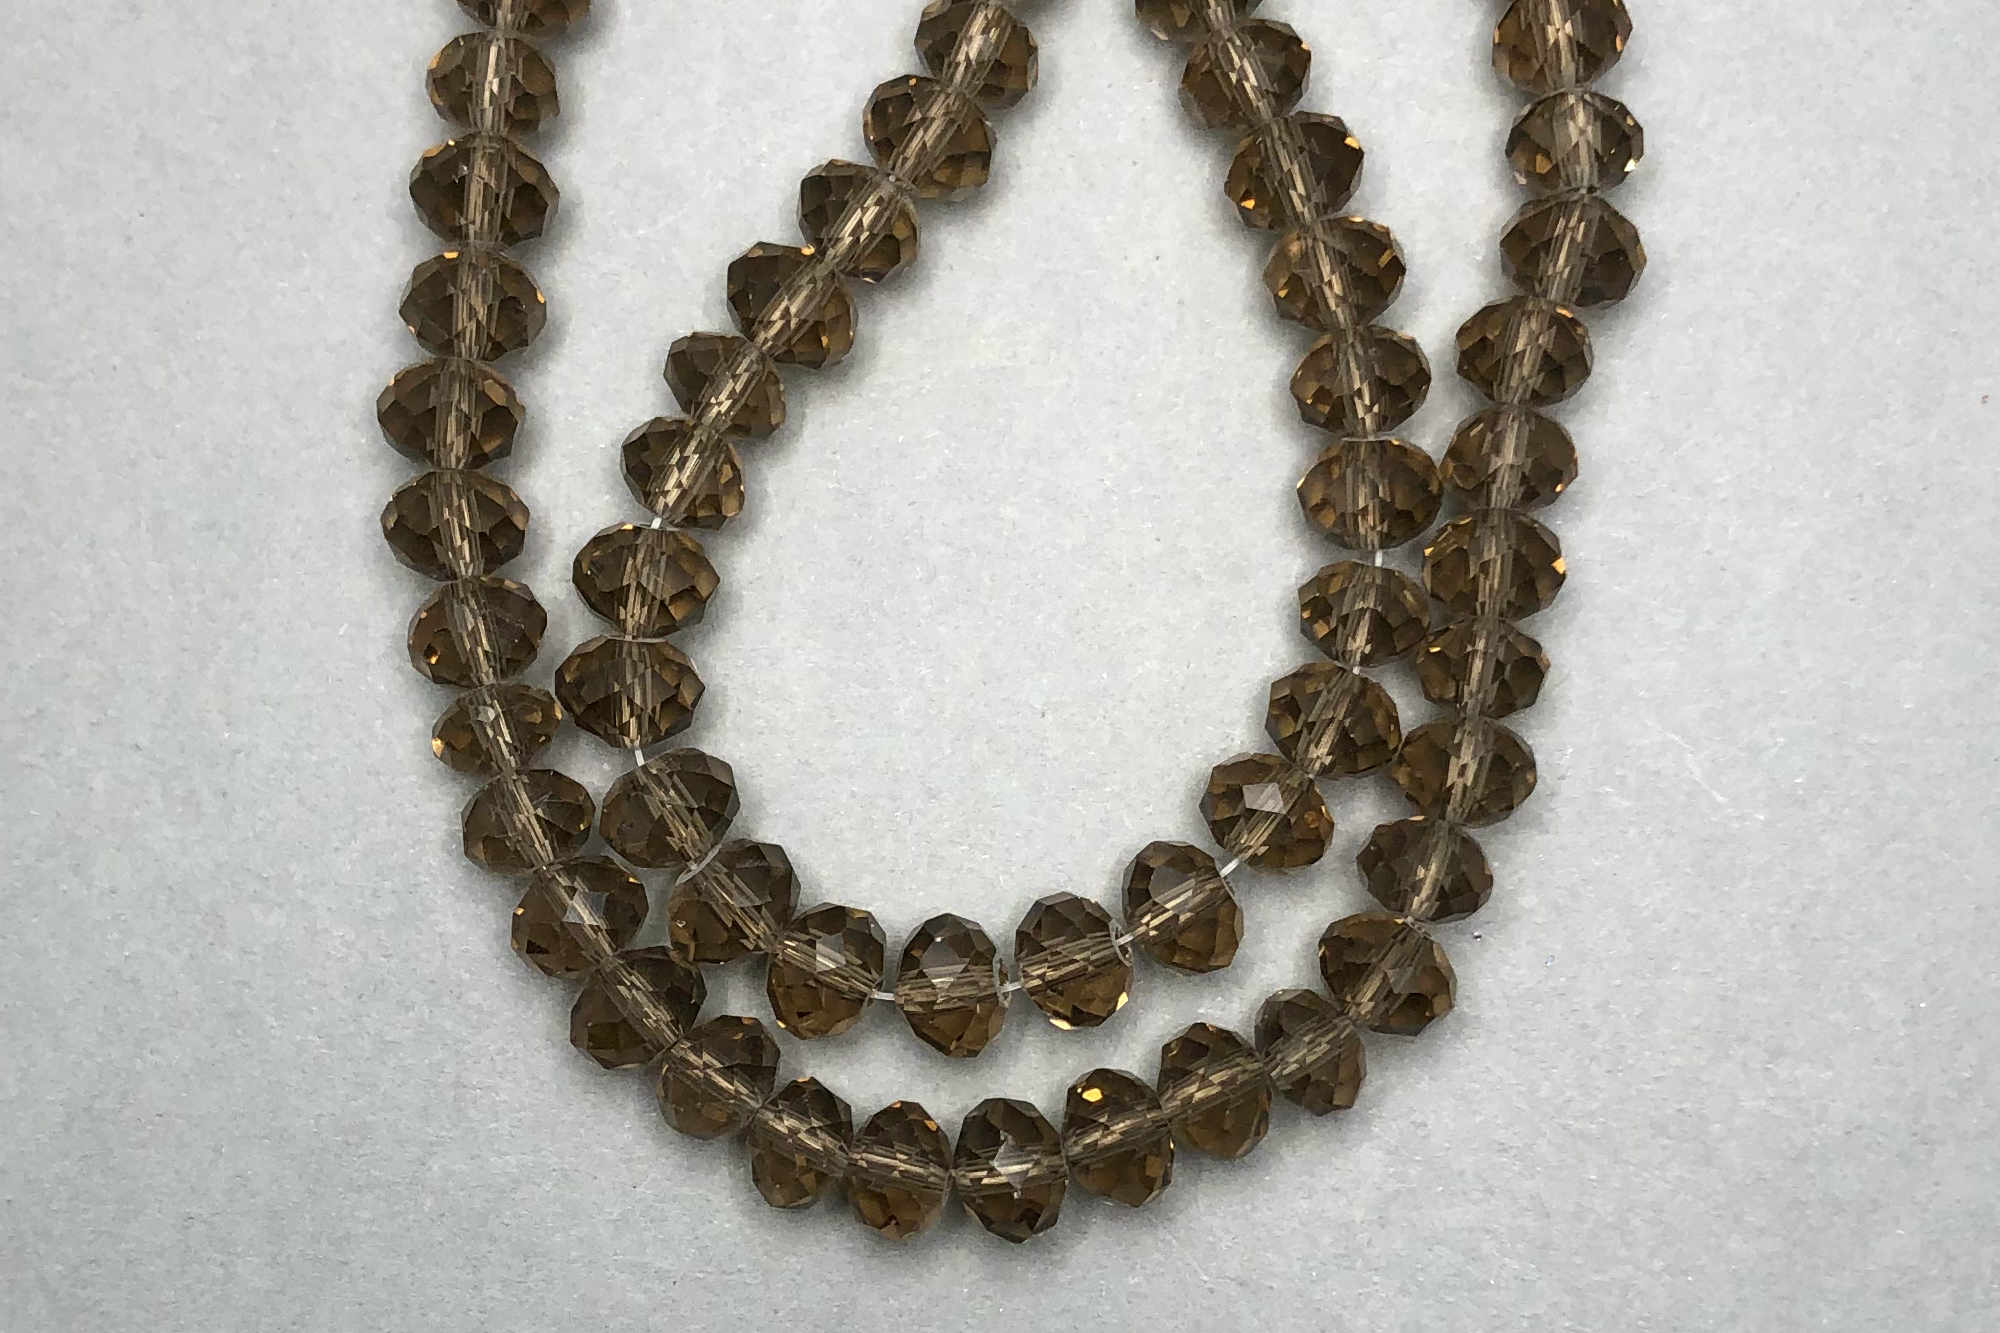 Mocha Faceted Glass Beads *NEW*